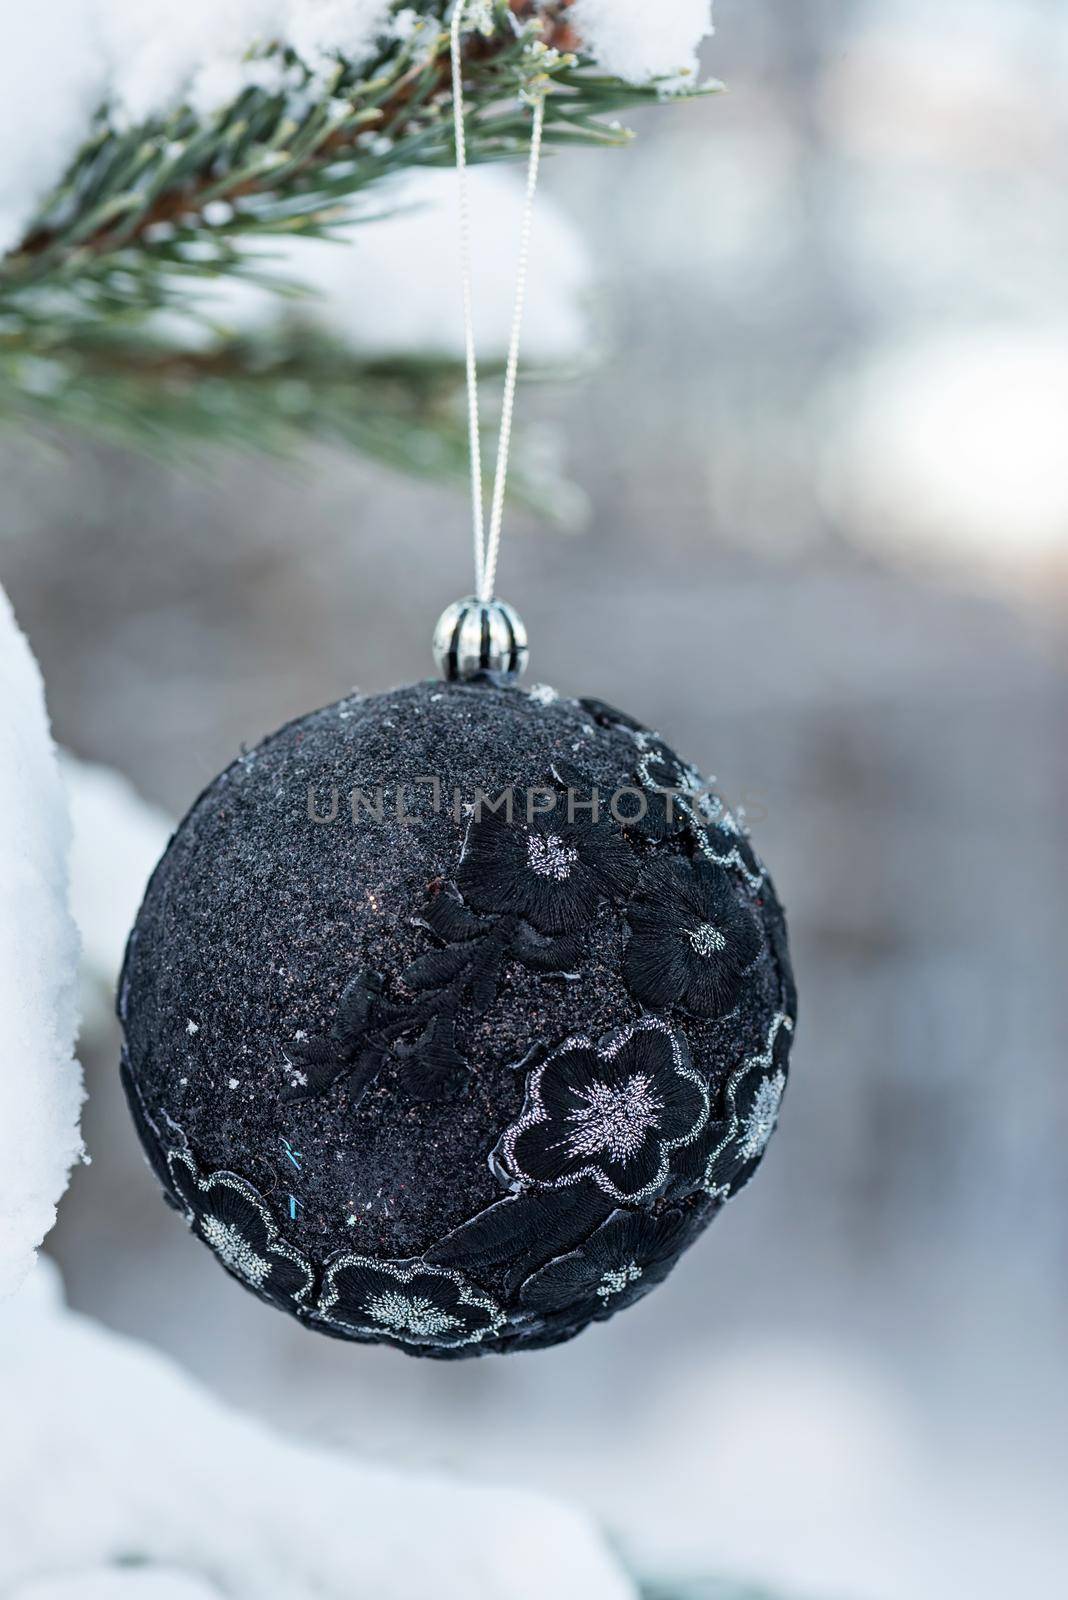 Hanging black glitter Christmas ball on spruce and over blurred background.